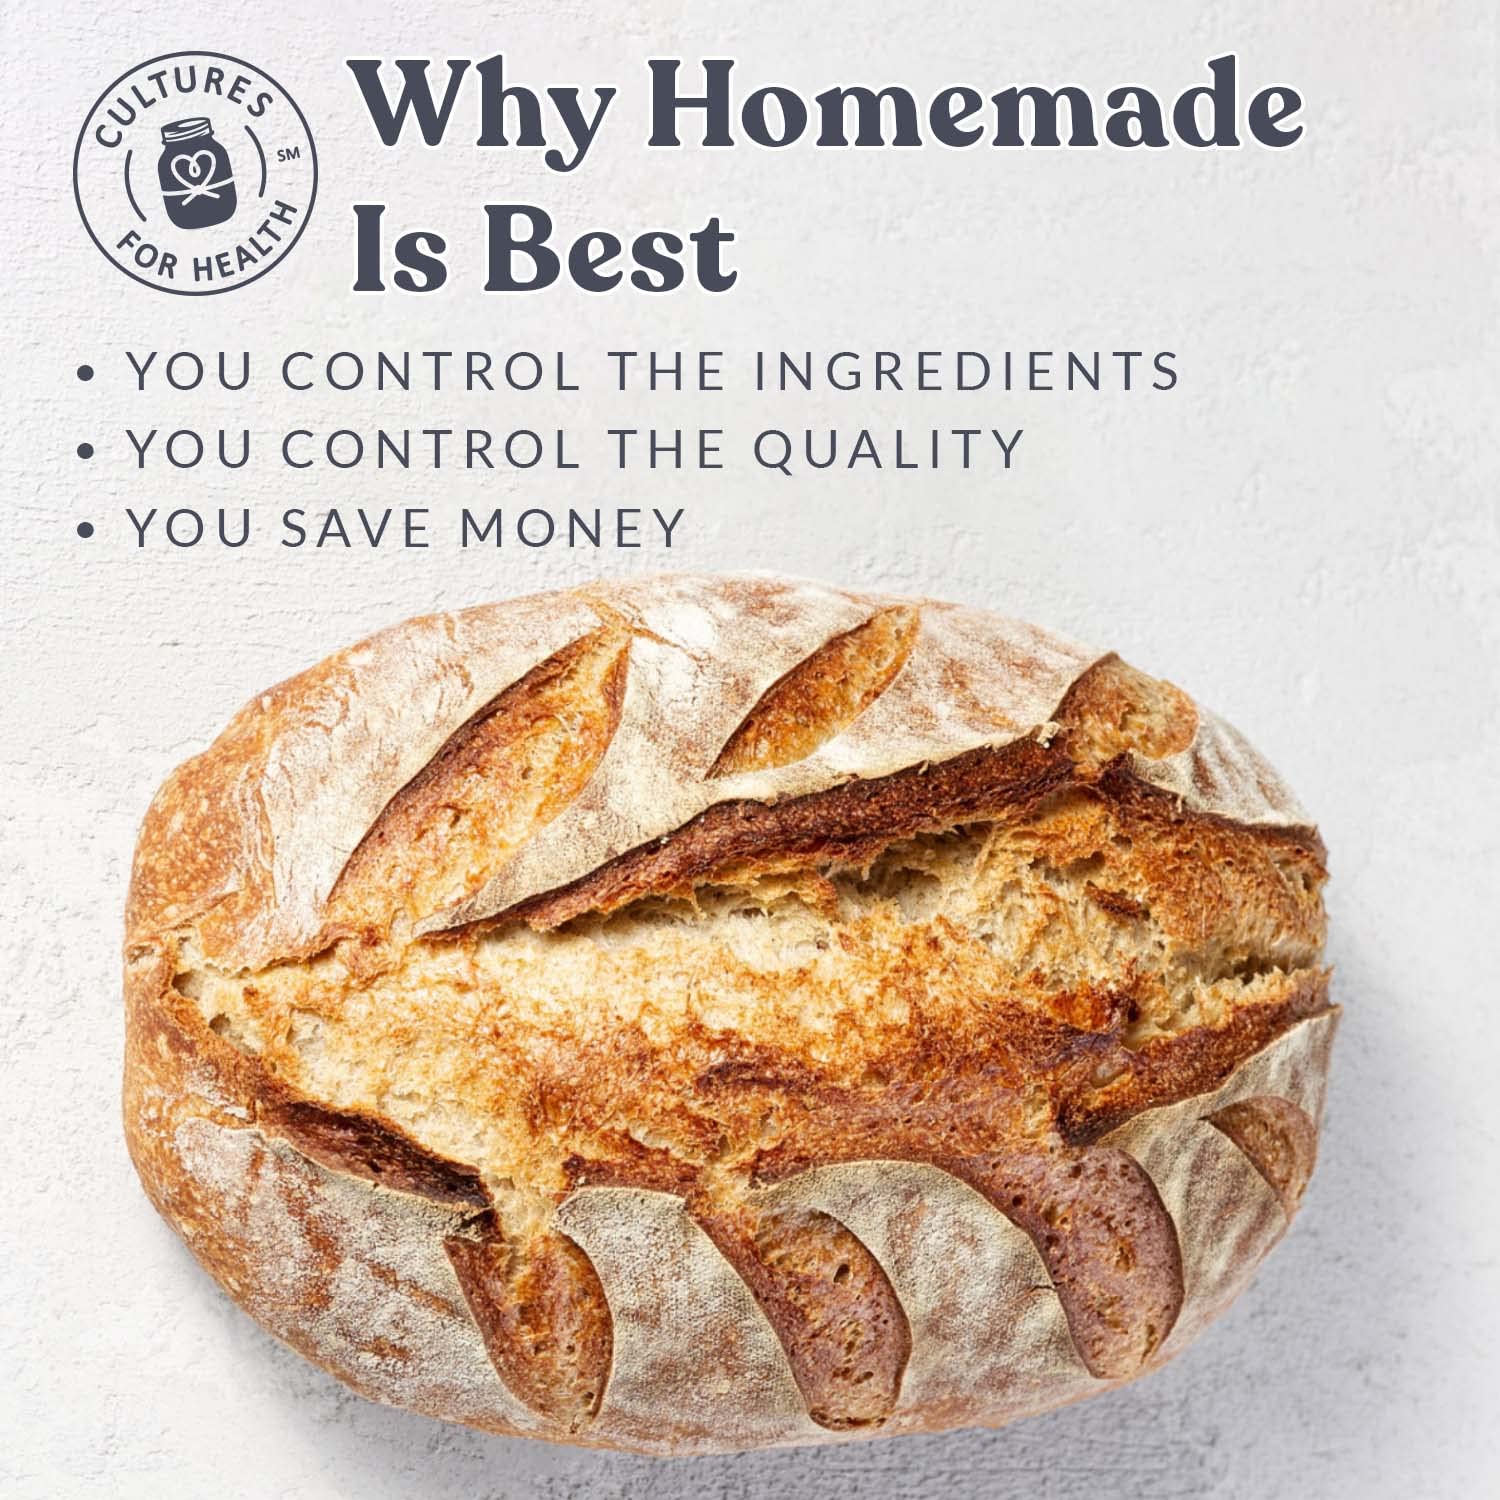 Cultures for Health Gluten Free Sourdough Starter | Heirloom Dehydrated Culture for Baking Gluten Free Bread | DIY Gluten Free Pasta, Pizza Dough, Pie Crust, & More | Non-GMO Prebiotic Sourdough Bread : Grocery & Gourmet Food